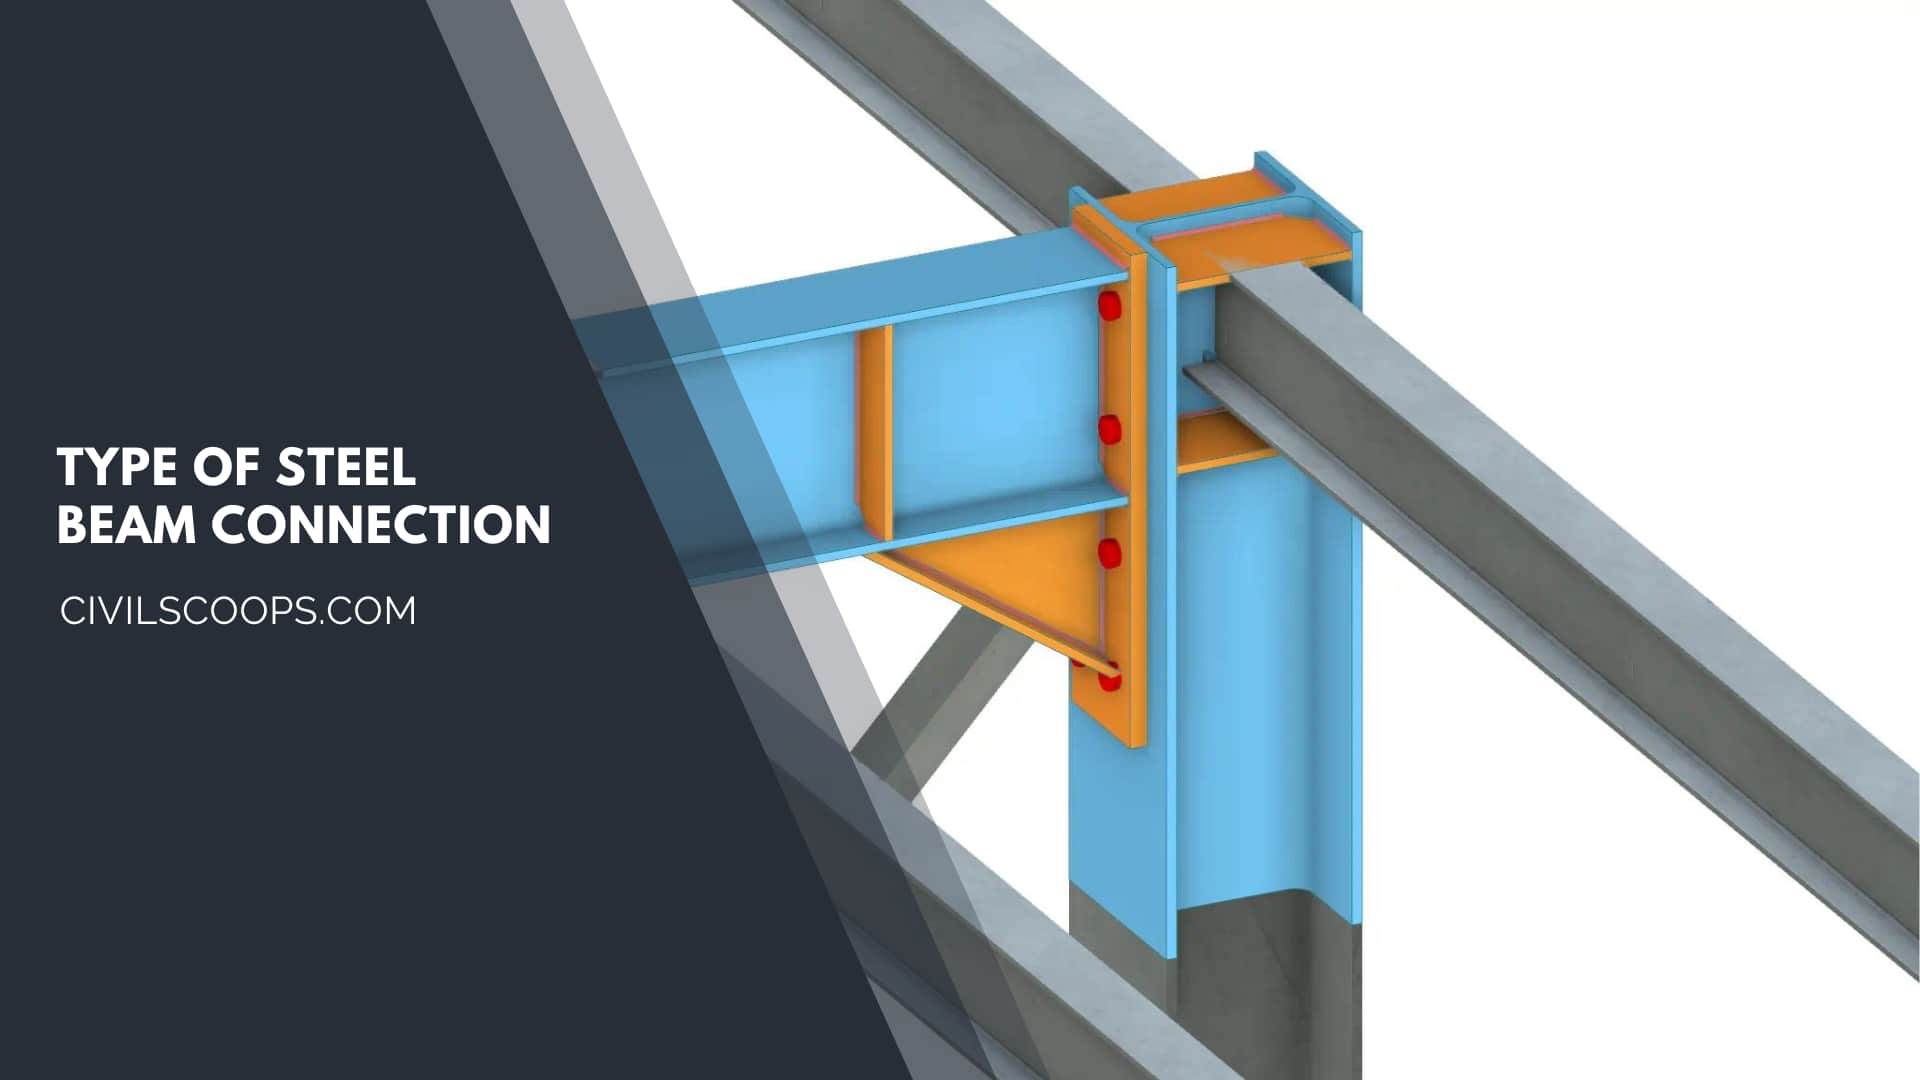 Type of Steel Beam Connection